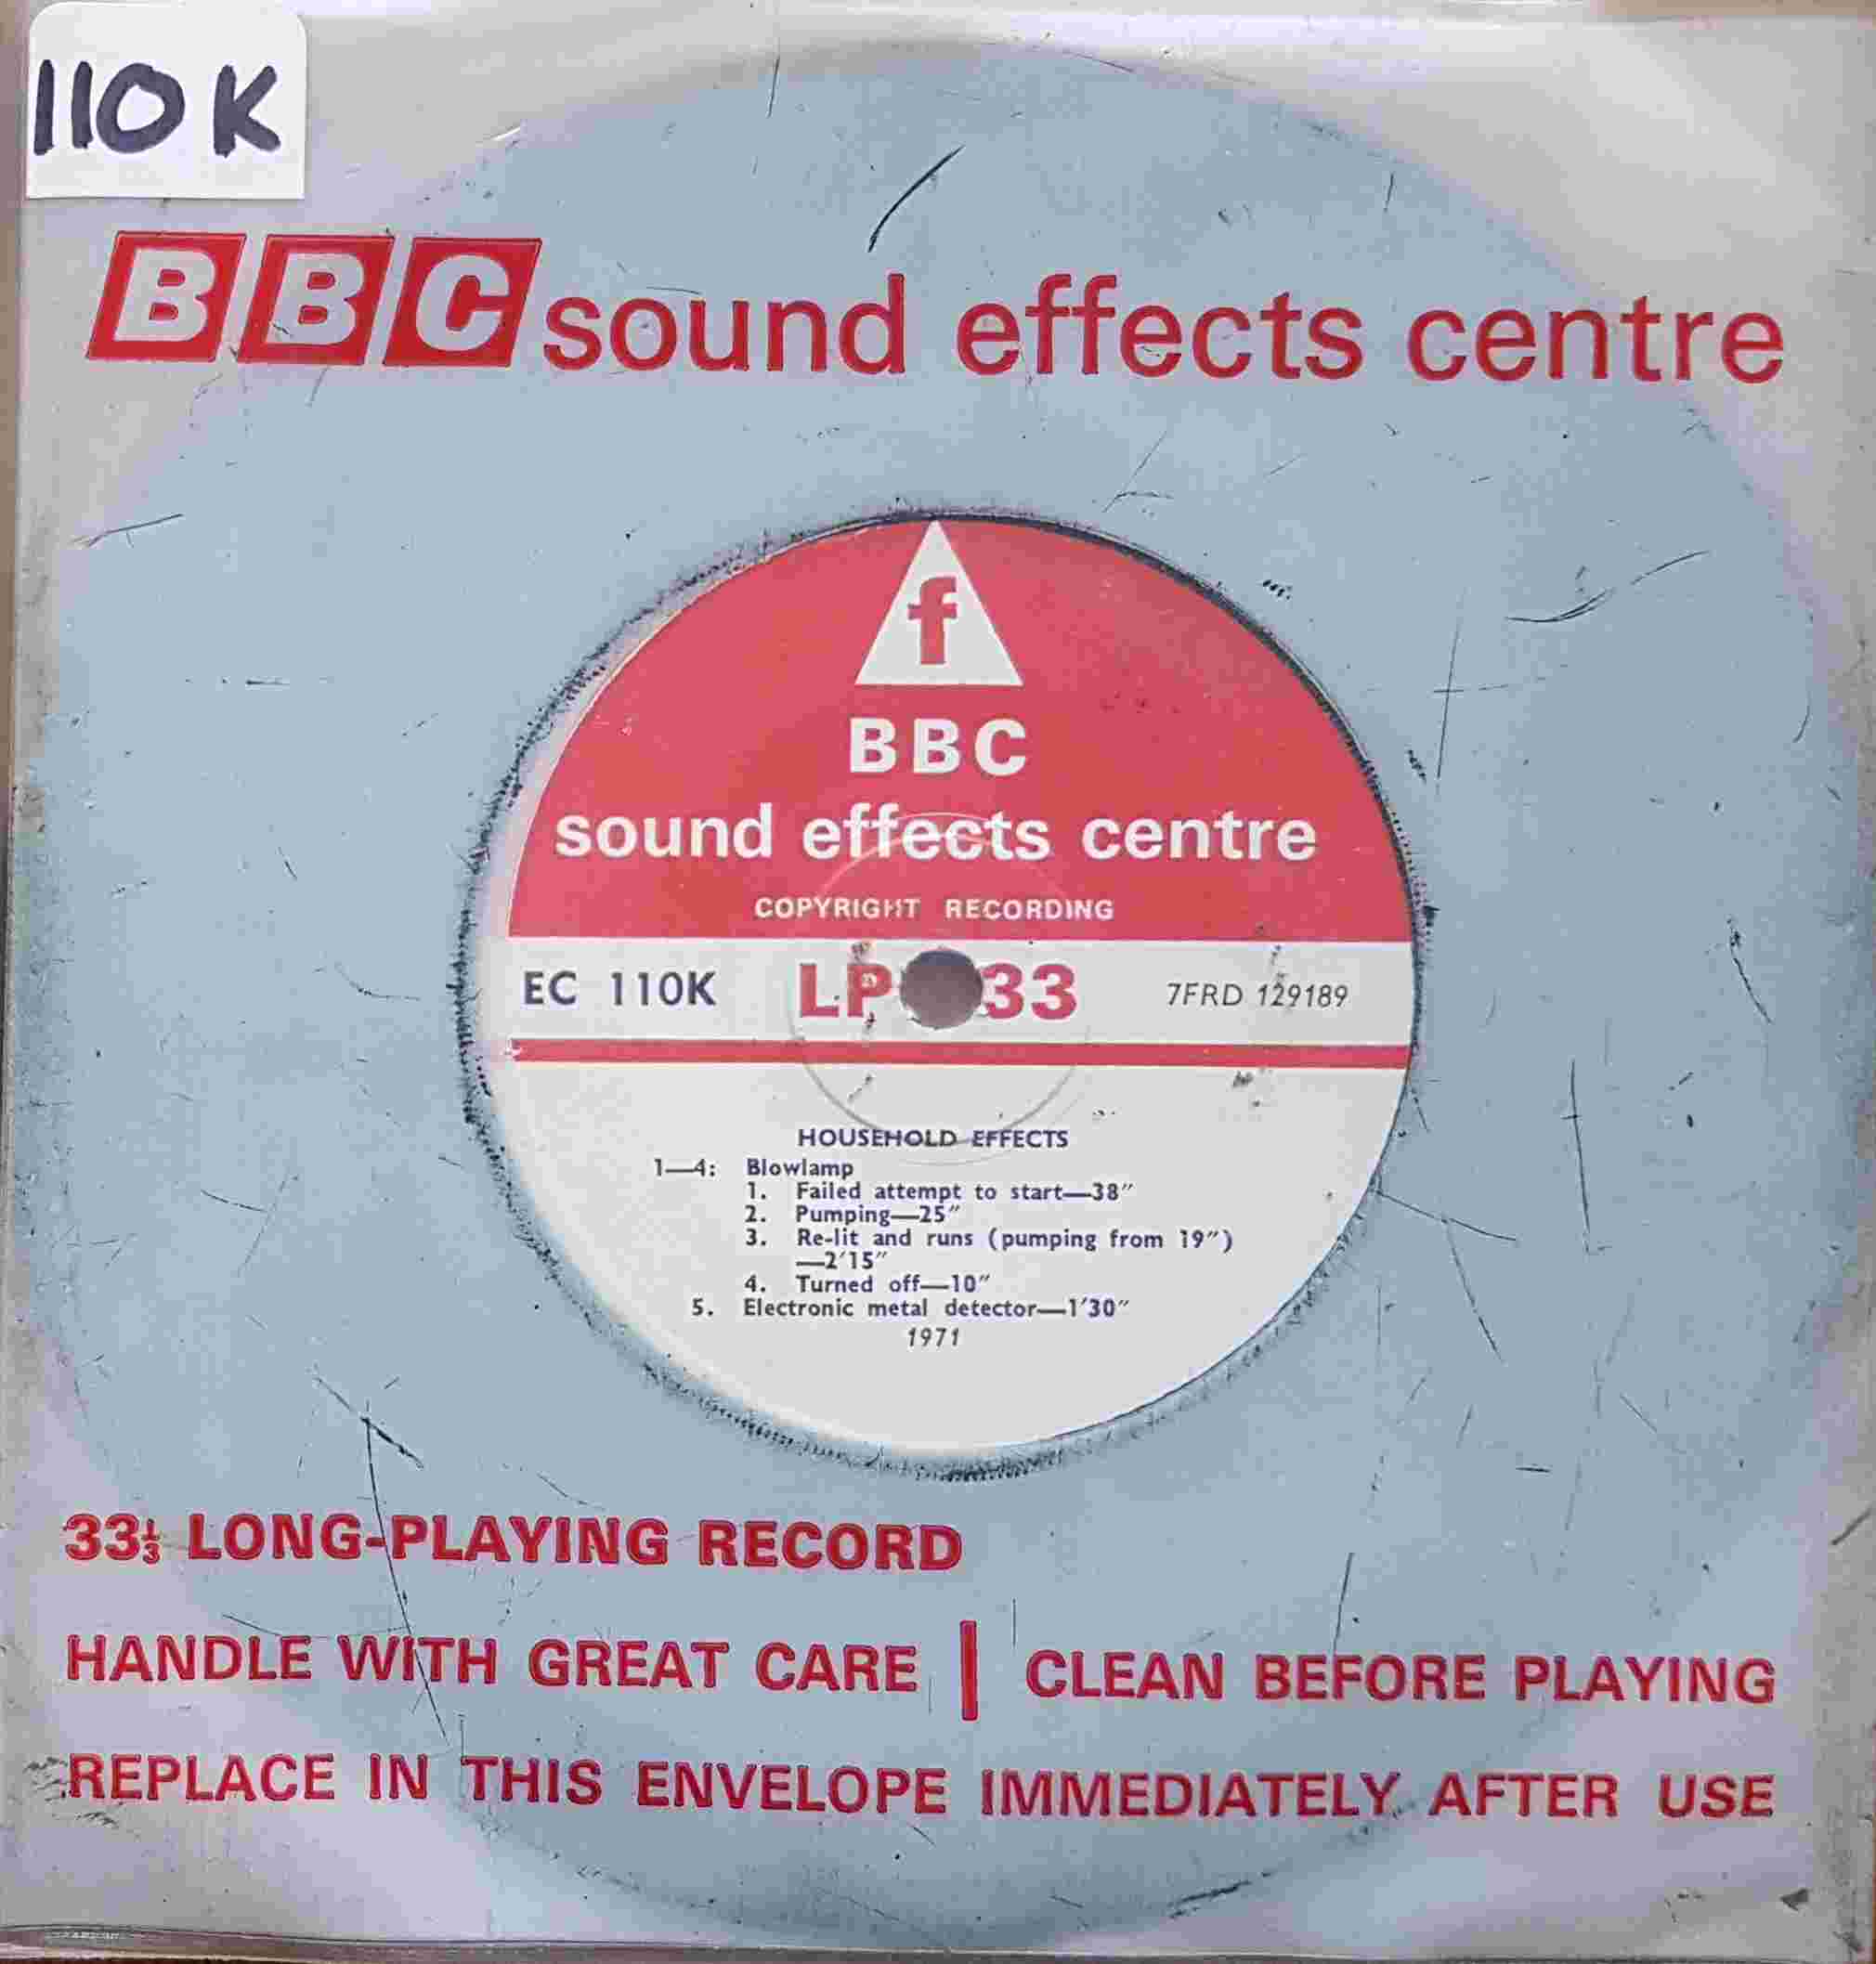 Picture of EC 110K Household effects by artist Not registered from the BBC singles - Records and Tapes library